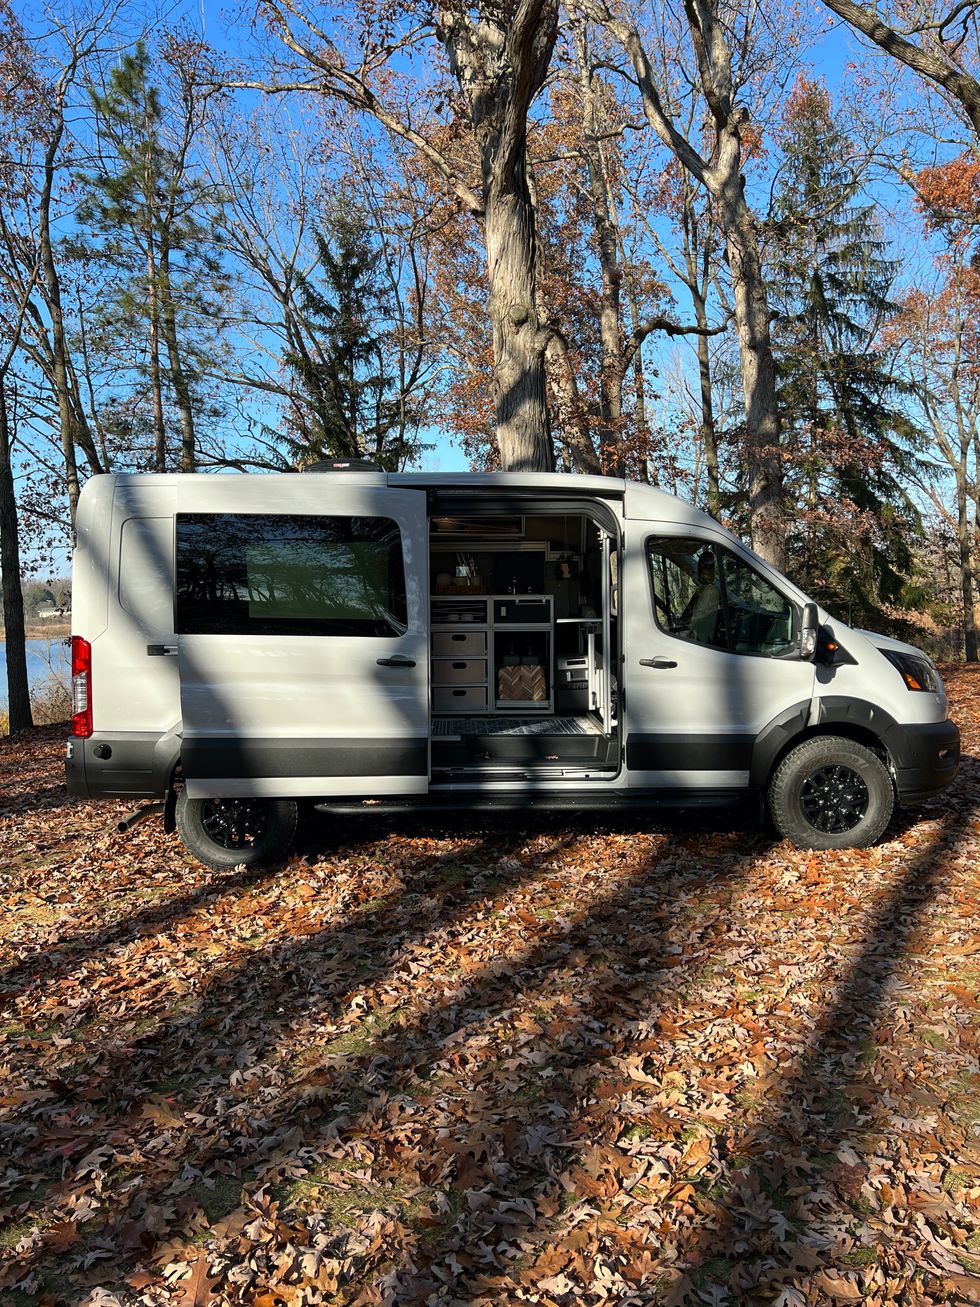 The 2023 Ford Transit Trail Is A Brilliant Blank Canvas For Vanlifers To  Build The 4x4 Camper Of Their Dreams - The Autopian